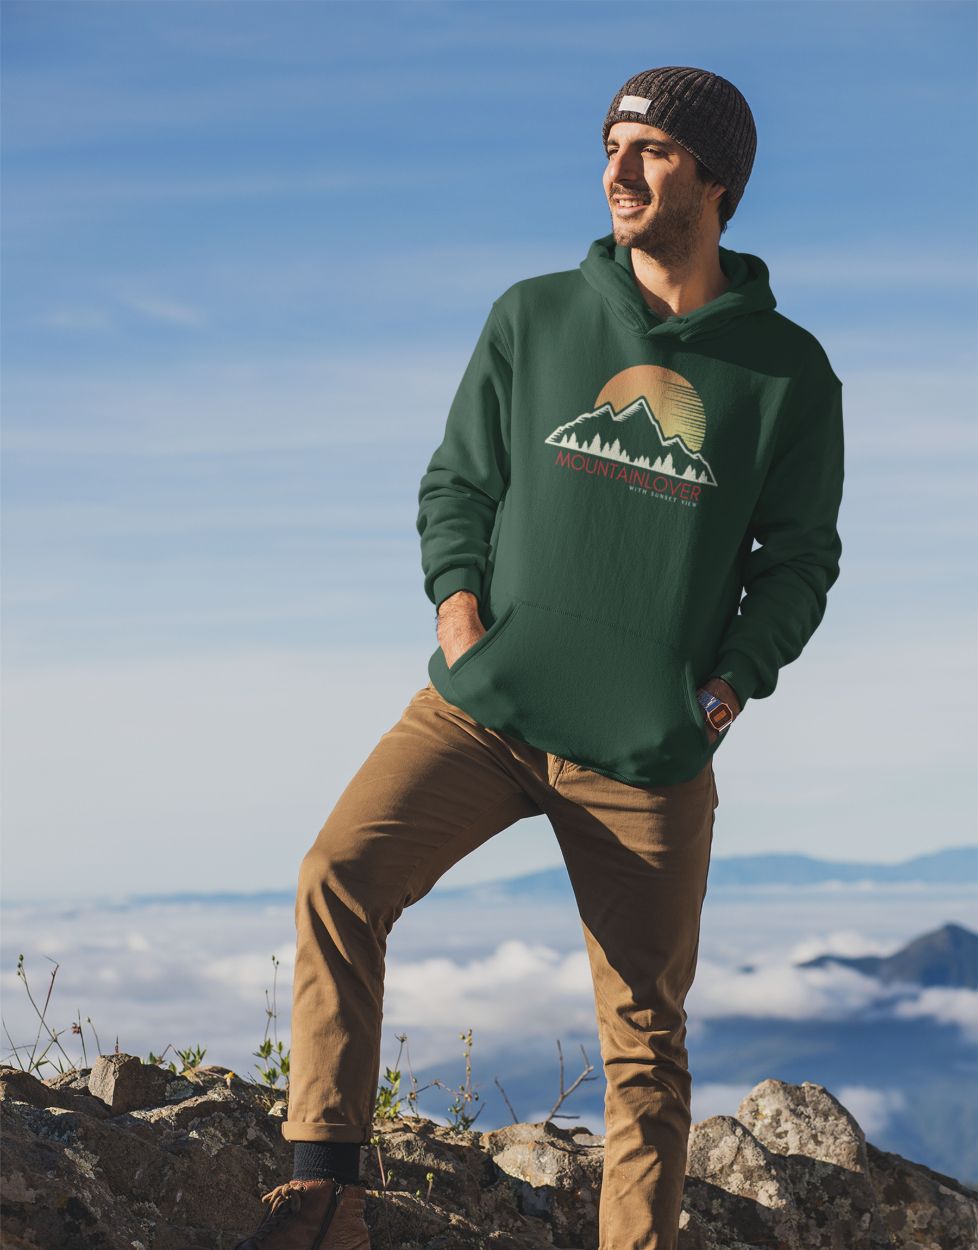 Mountainlover Hoodie